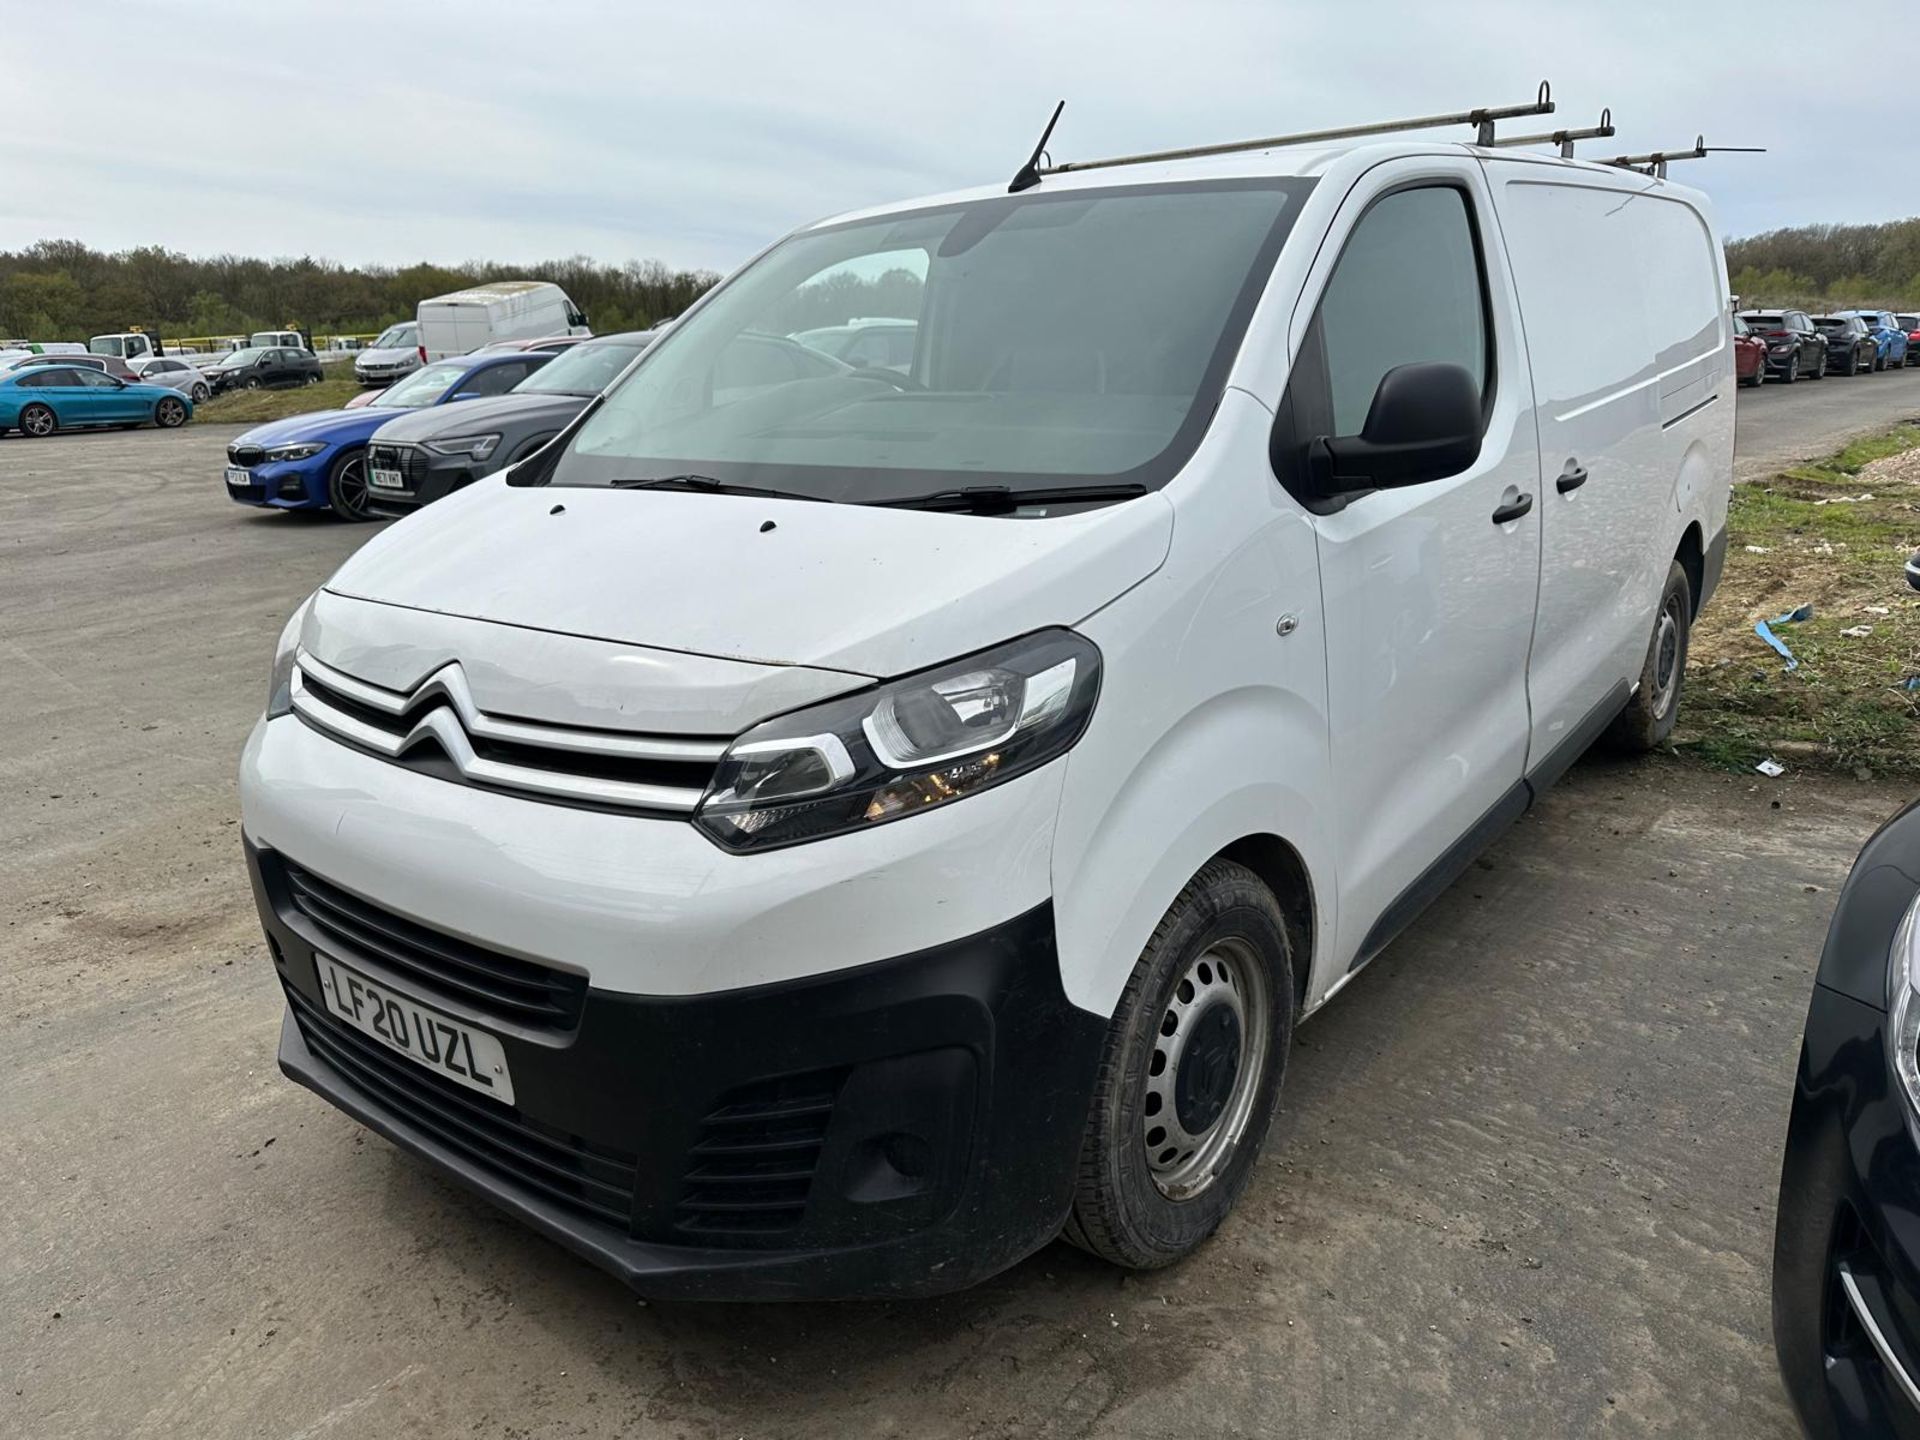 2020 20 CITROEN DISPATCH PANEL VAN - 2.0 6 SPEED - 111K MILES - AIR CON - PLY LINED - EURO 6  - Image 8 of 10